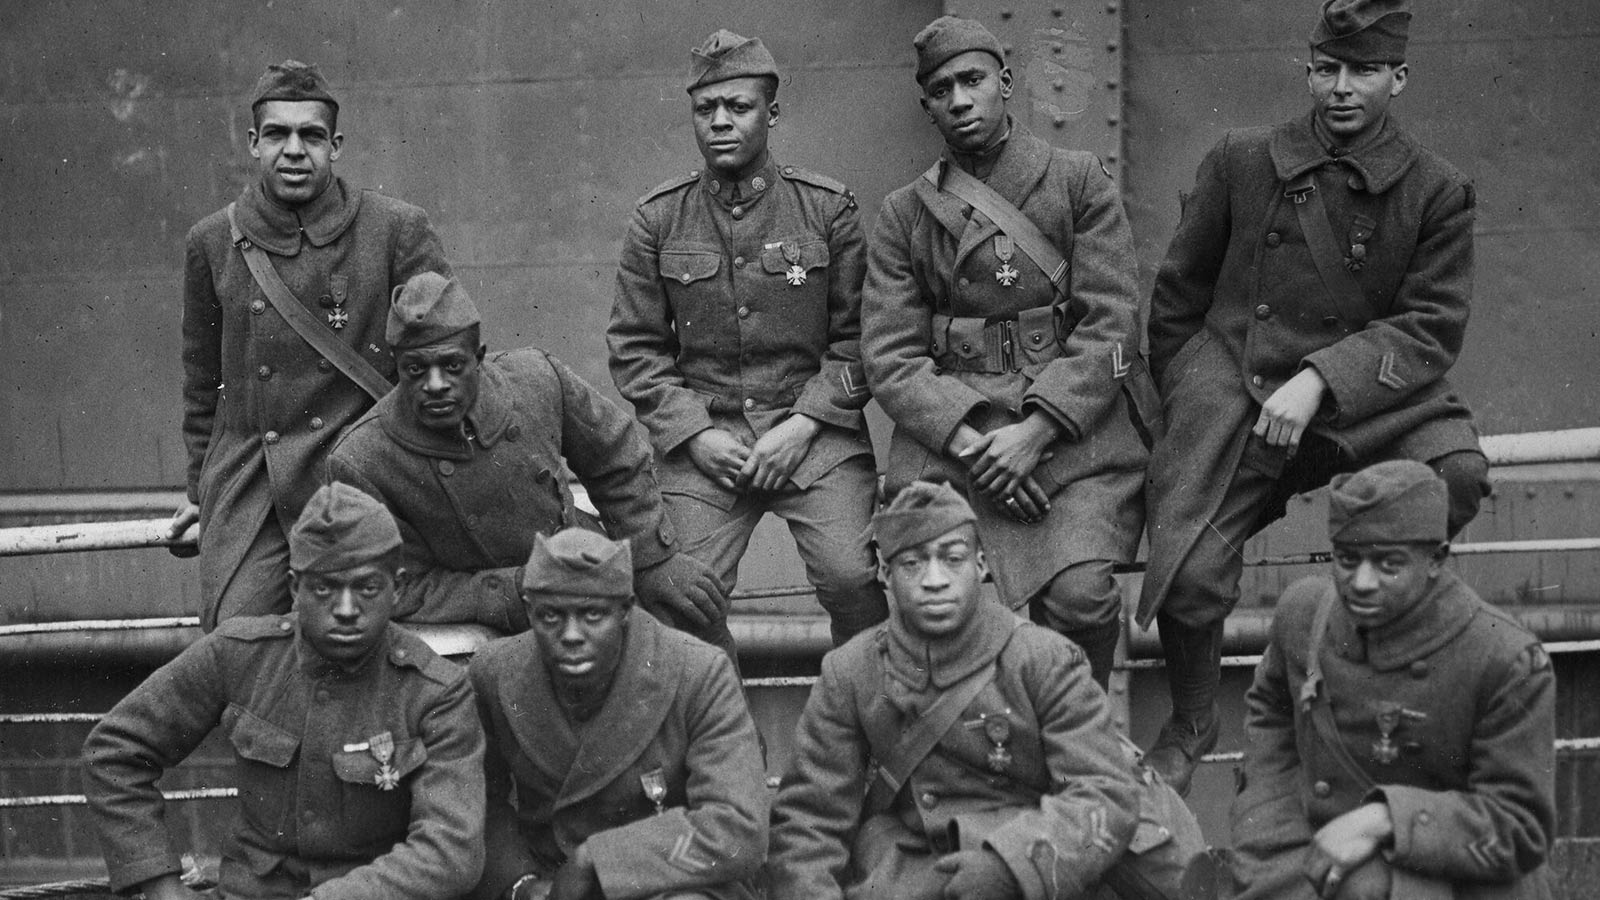 The Harlem Hellfighters were war heroes. Then they came home to racism.